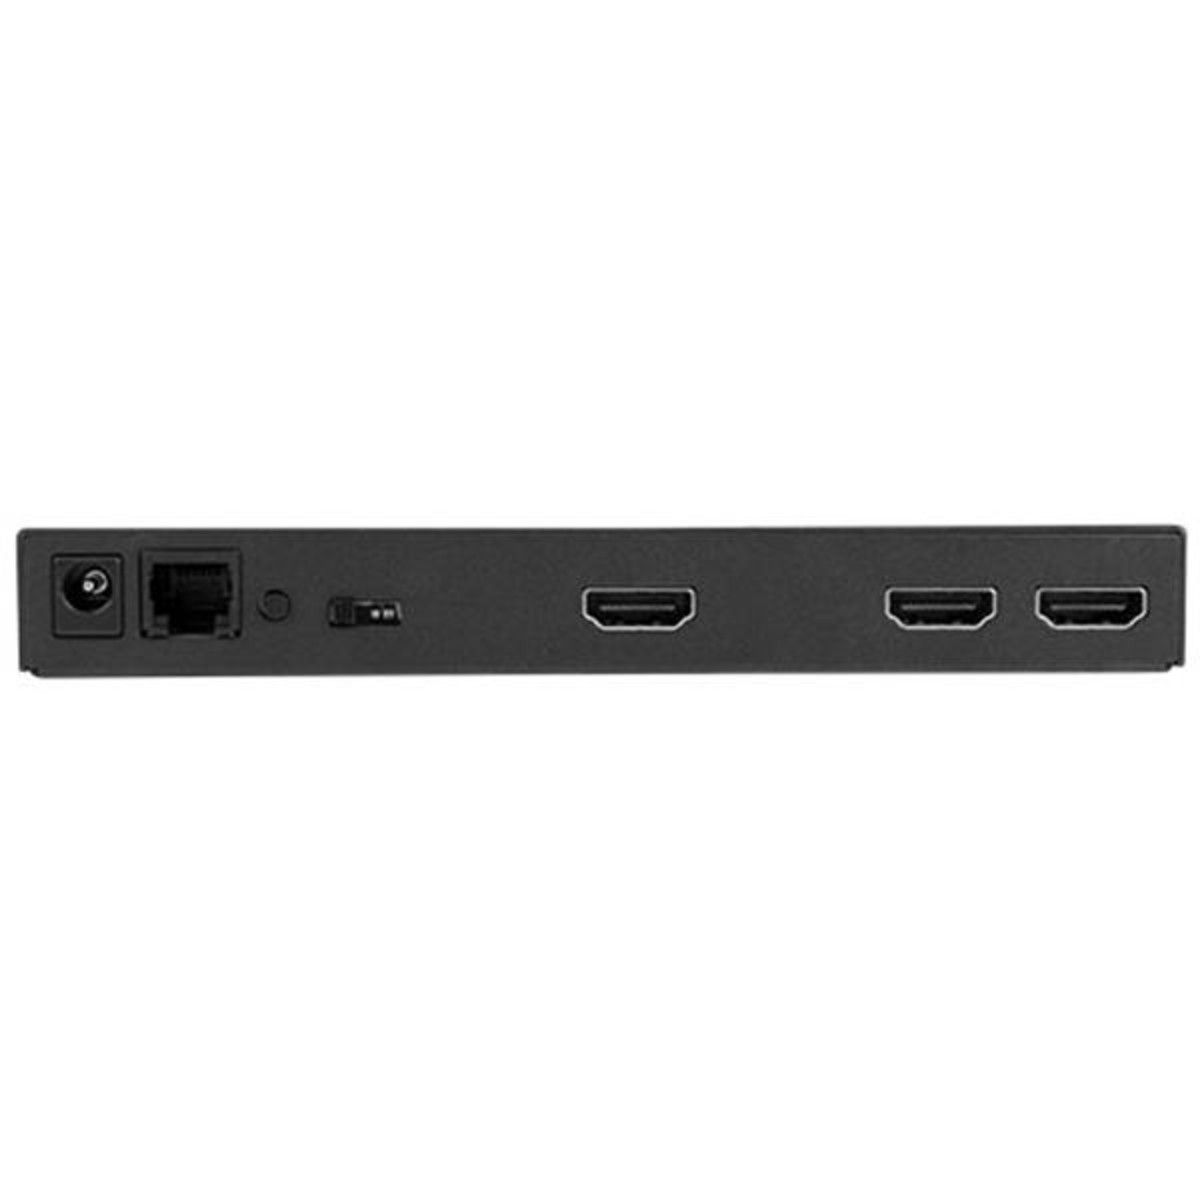 2-Port HDMI Automatic Video Switch